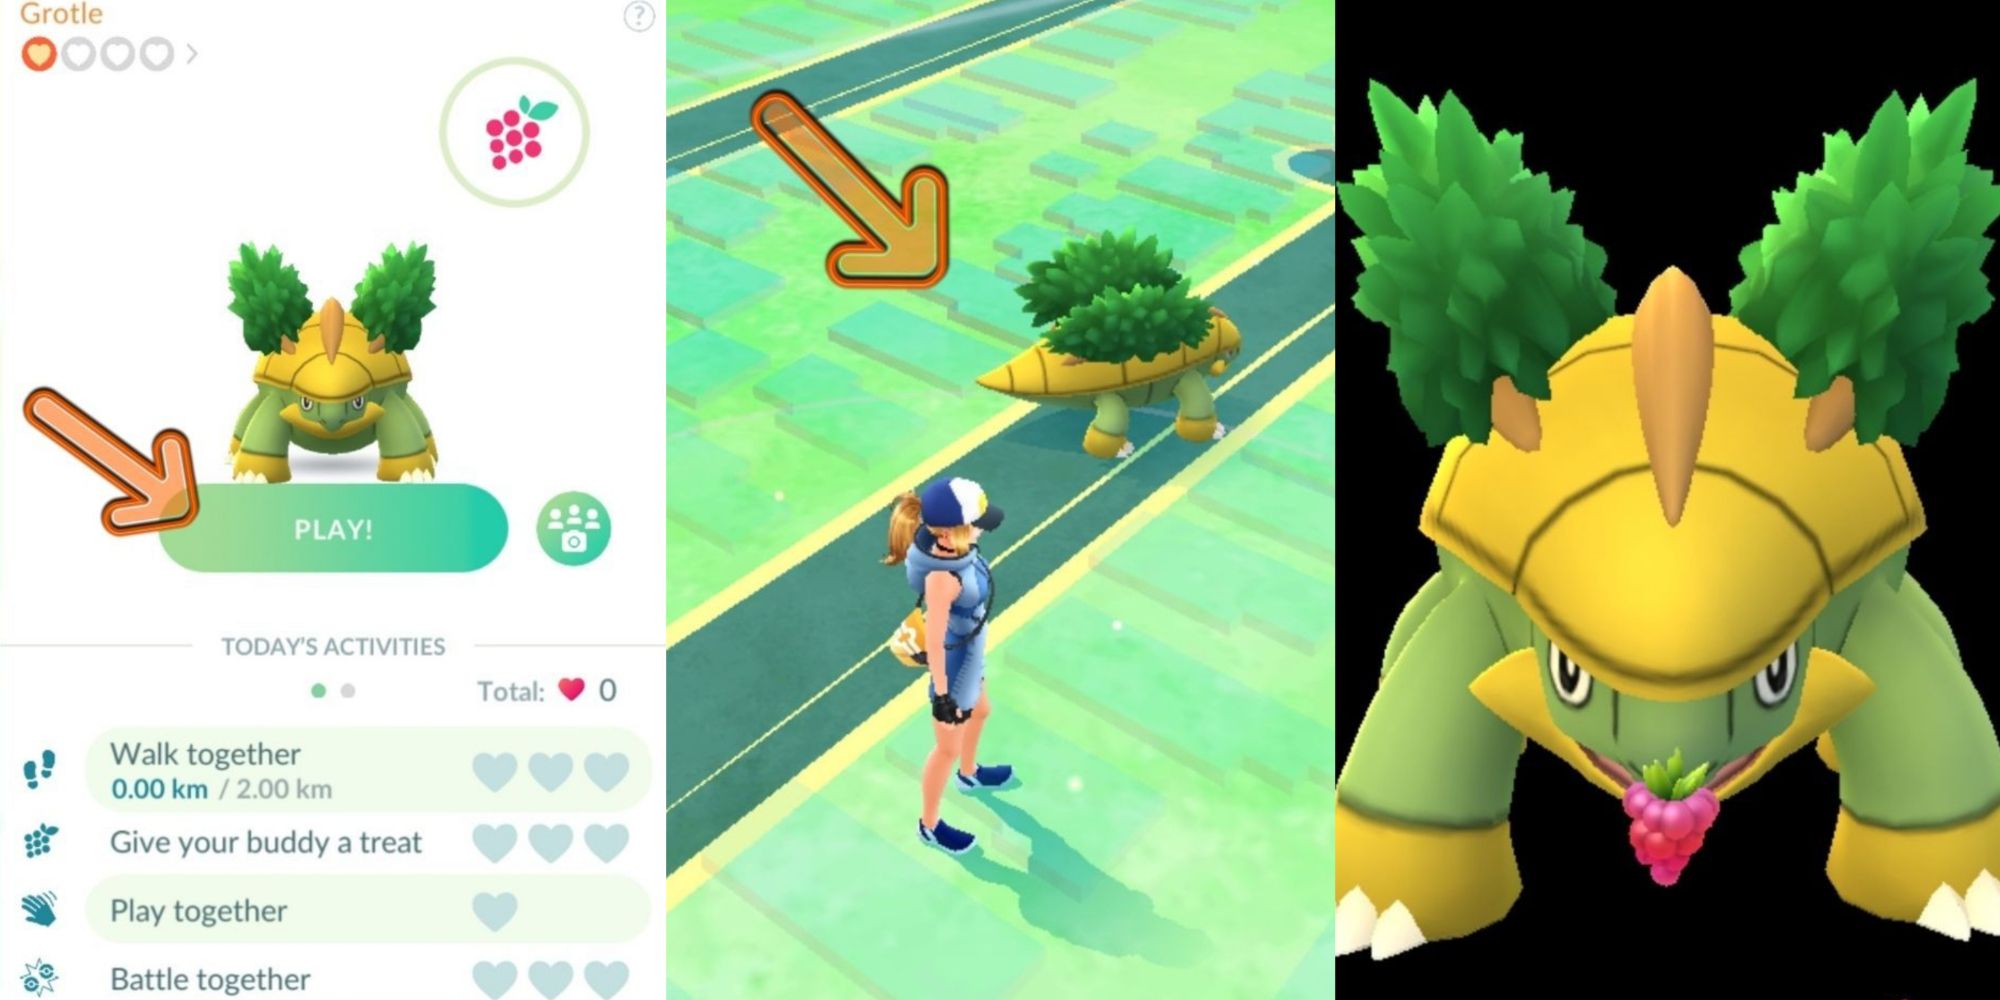 Split image screenshots of playing with Grotle, walking with Grotle, and feeding Grotle in Pokemon Go.